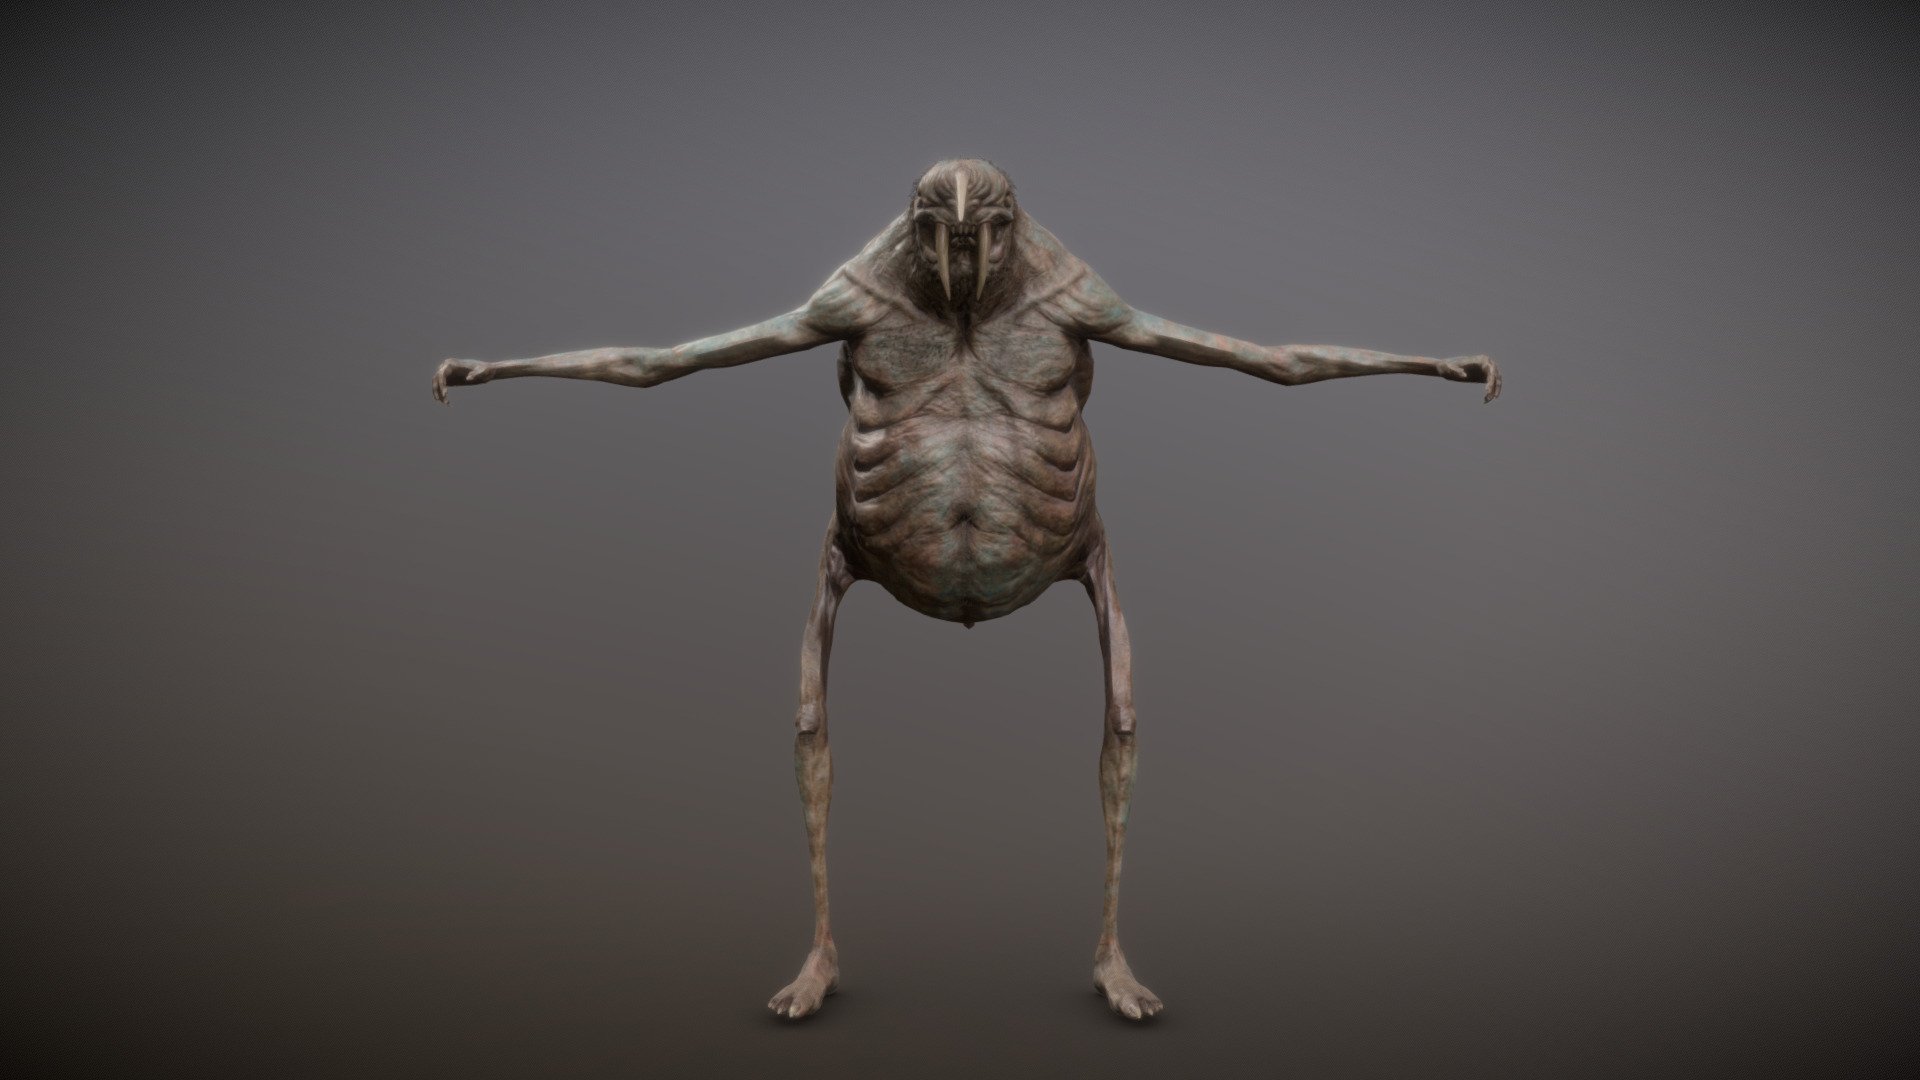 T-pose version of the Featherless Biped
She’s nice

https://sketchfab.com/3d-models/featherless-biped-3126f0a8ab2b4ff6b789715ef4f60756 - Featherless Biped Tpose - Buy Royalty Free 3D model by benbeauart 3d model